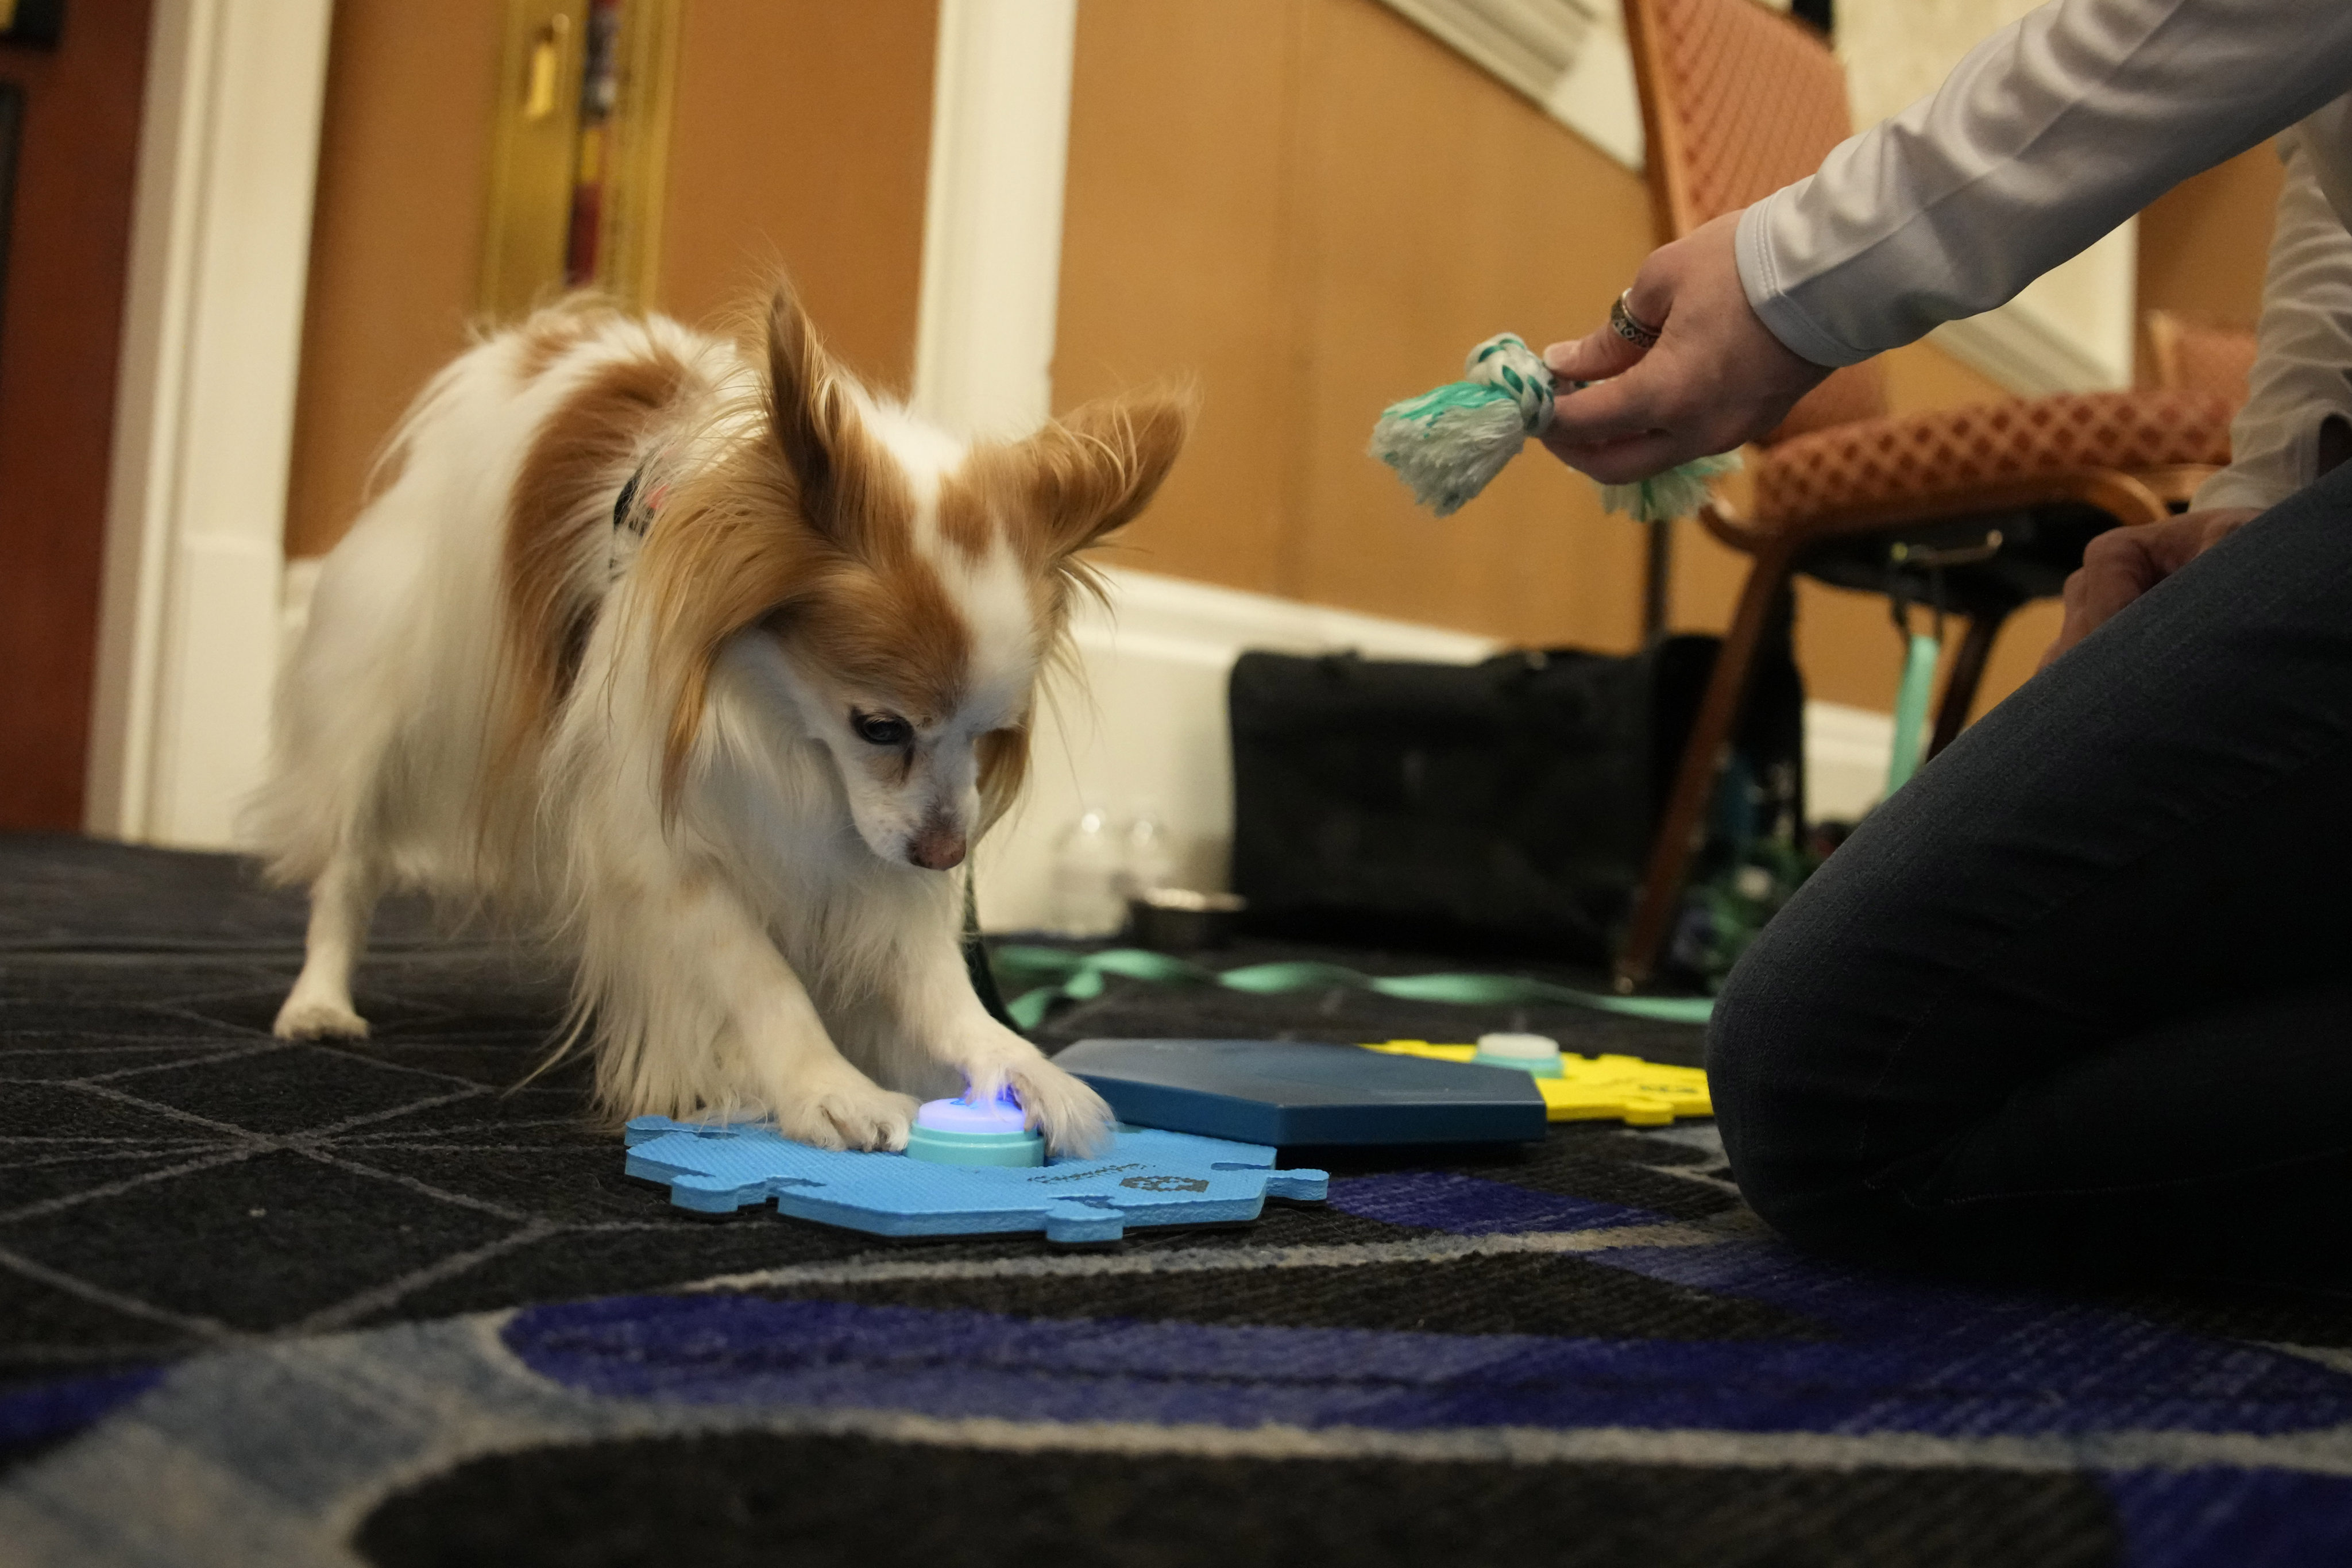 A dog pushes buttons on FluentPet’s starter kit - designed to let dogs “talk” to their owners - at CES 2023. Photo: AP